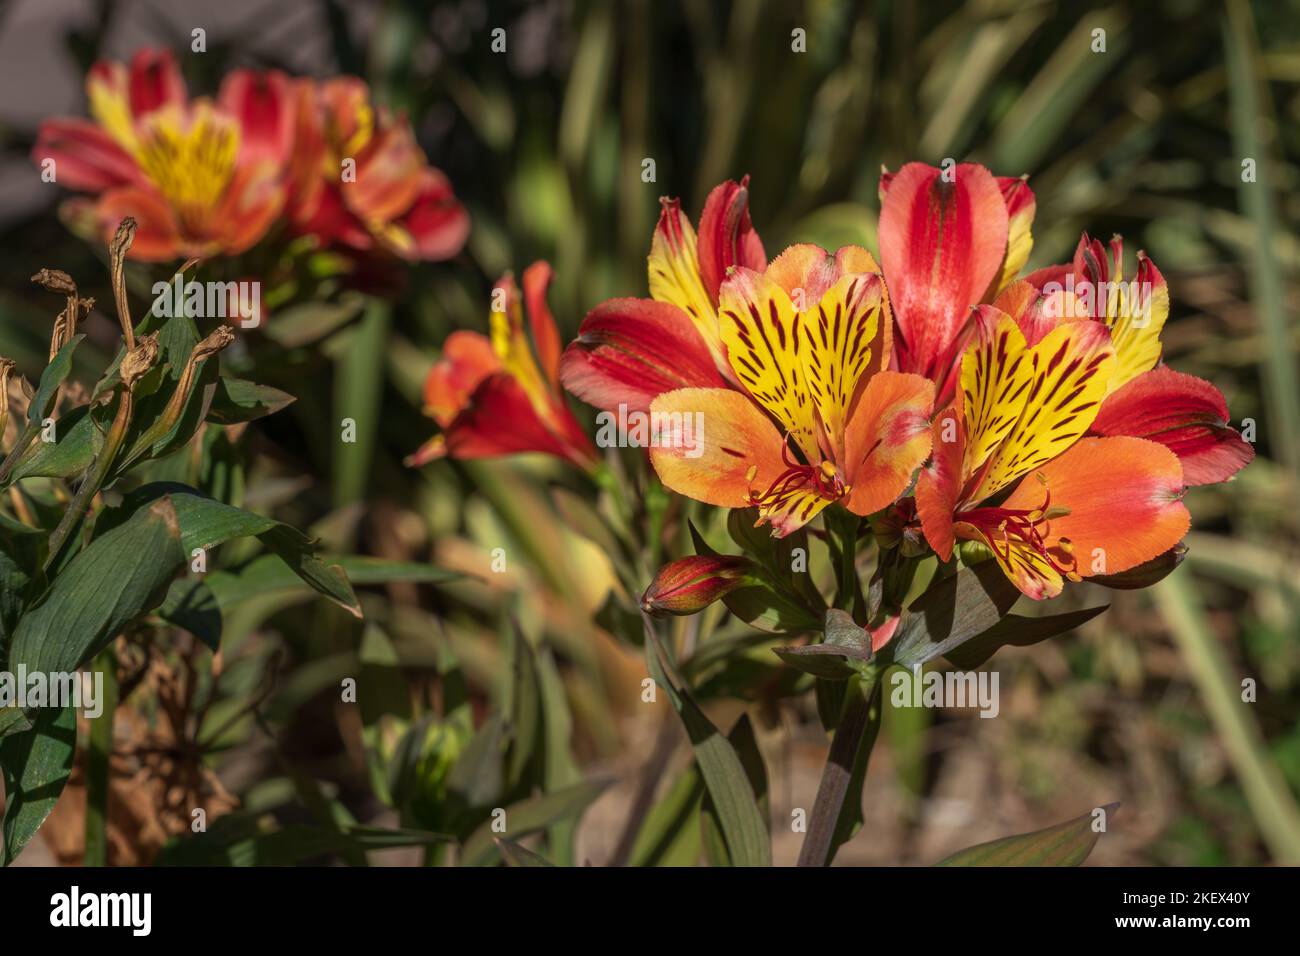 Closeup view of colorful and exotic red orange and yellow flowers of alstroemeria aka Peruvian lily or lily of the Incas blooming outdoors in garden Stock Photo